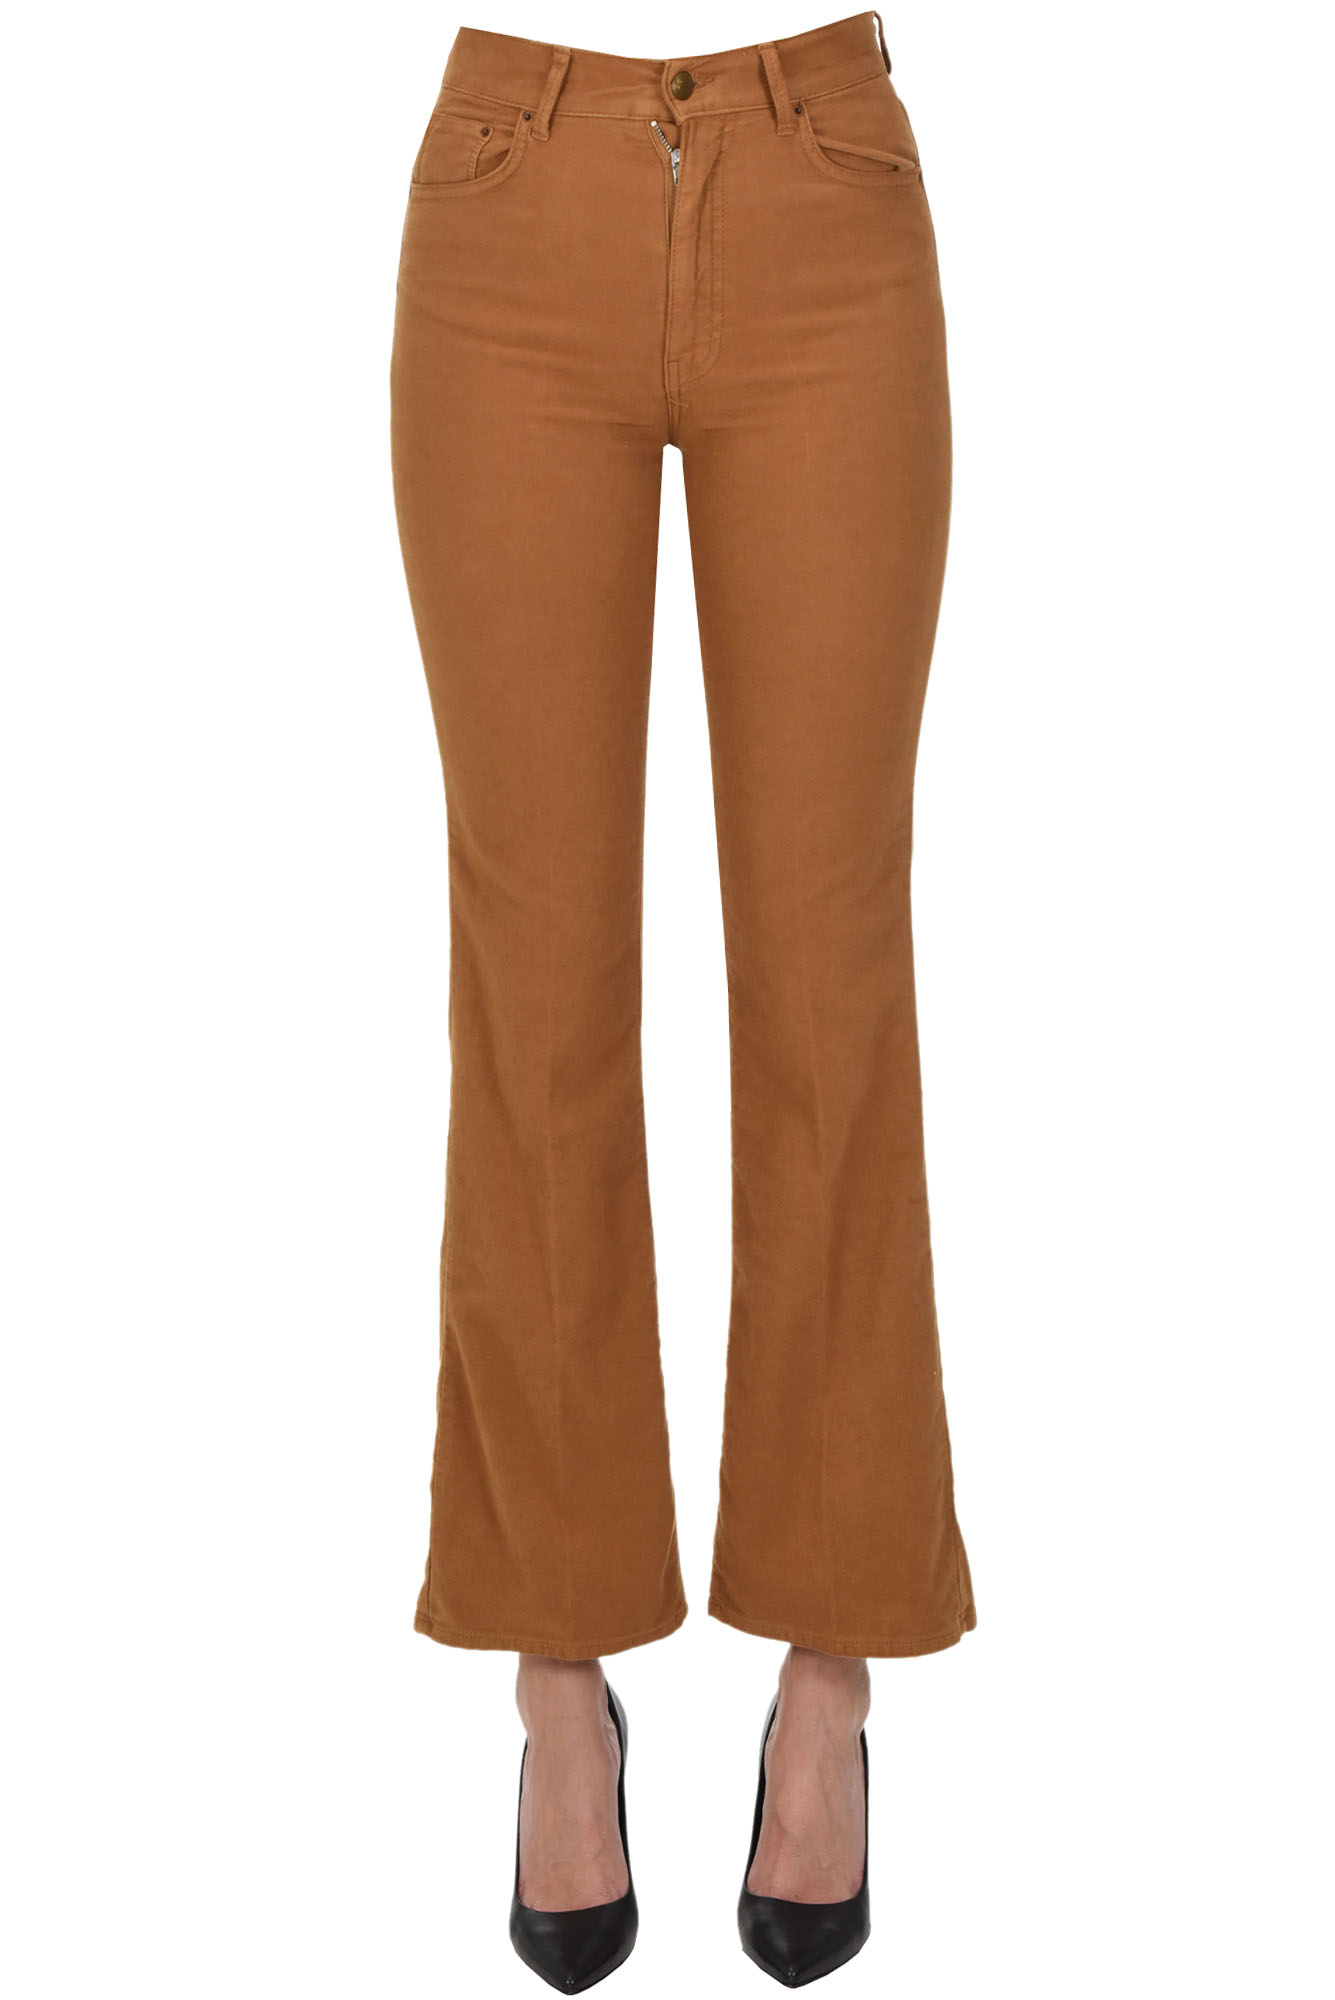 Ps. Don't Forget Me Velvet 5 Pockets Style Trousers In Light Brown